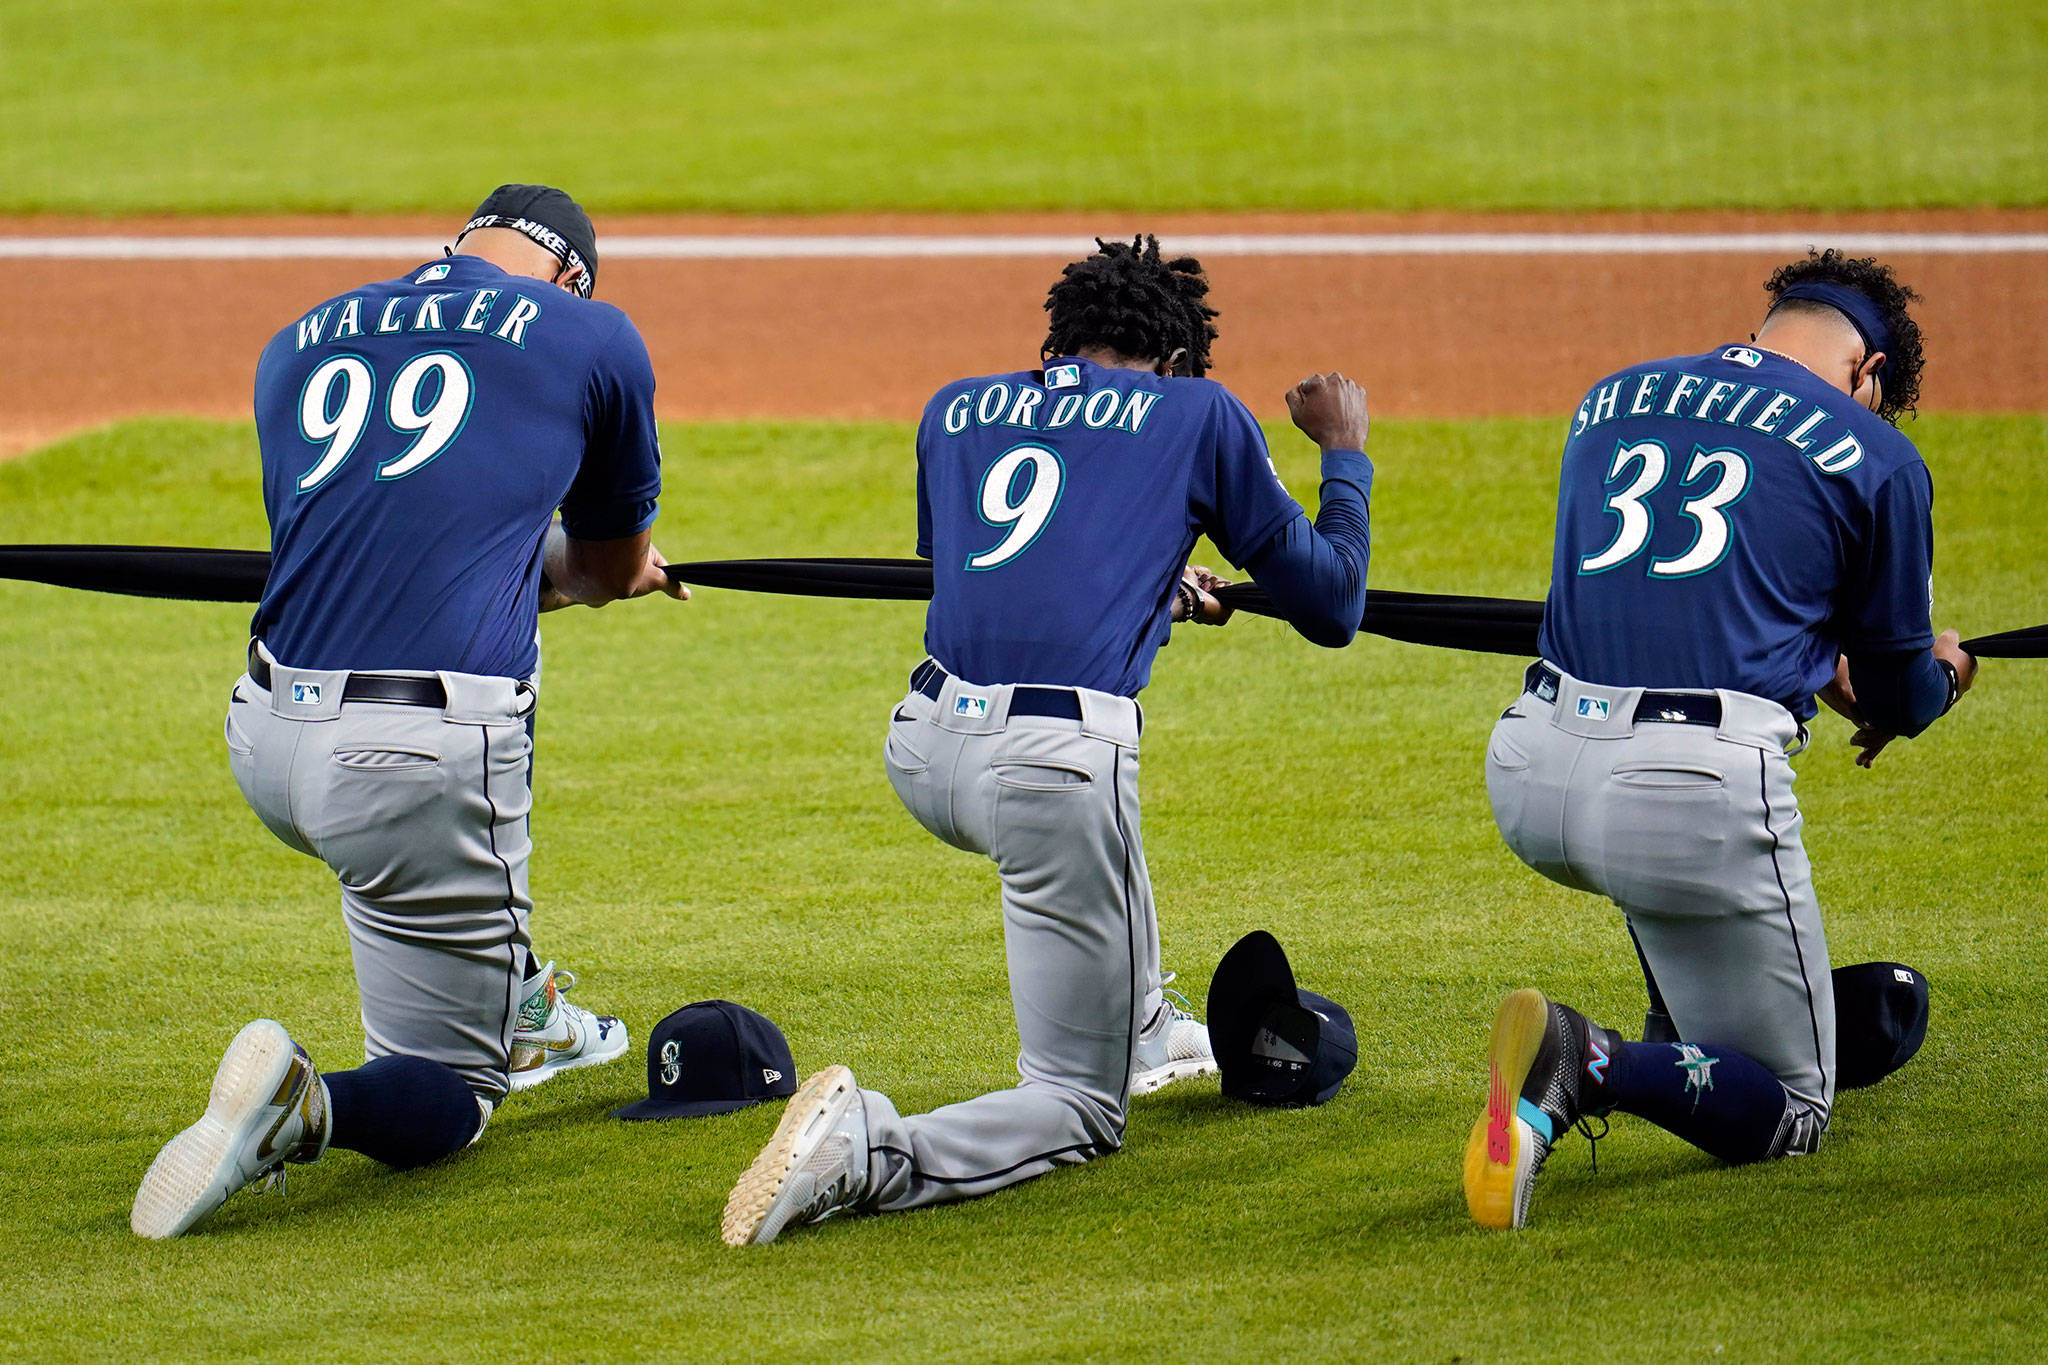 The Mariners’ Dee Gordon (9) raises his fist as he kneels for social justice with teammates Taijuan Walker (99) and Justus Sheffield (33) before a game against the Astros on July 24, 2020, in Houston. (AP Photo/David J. Phillip)